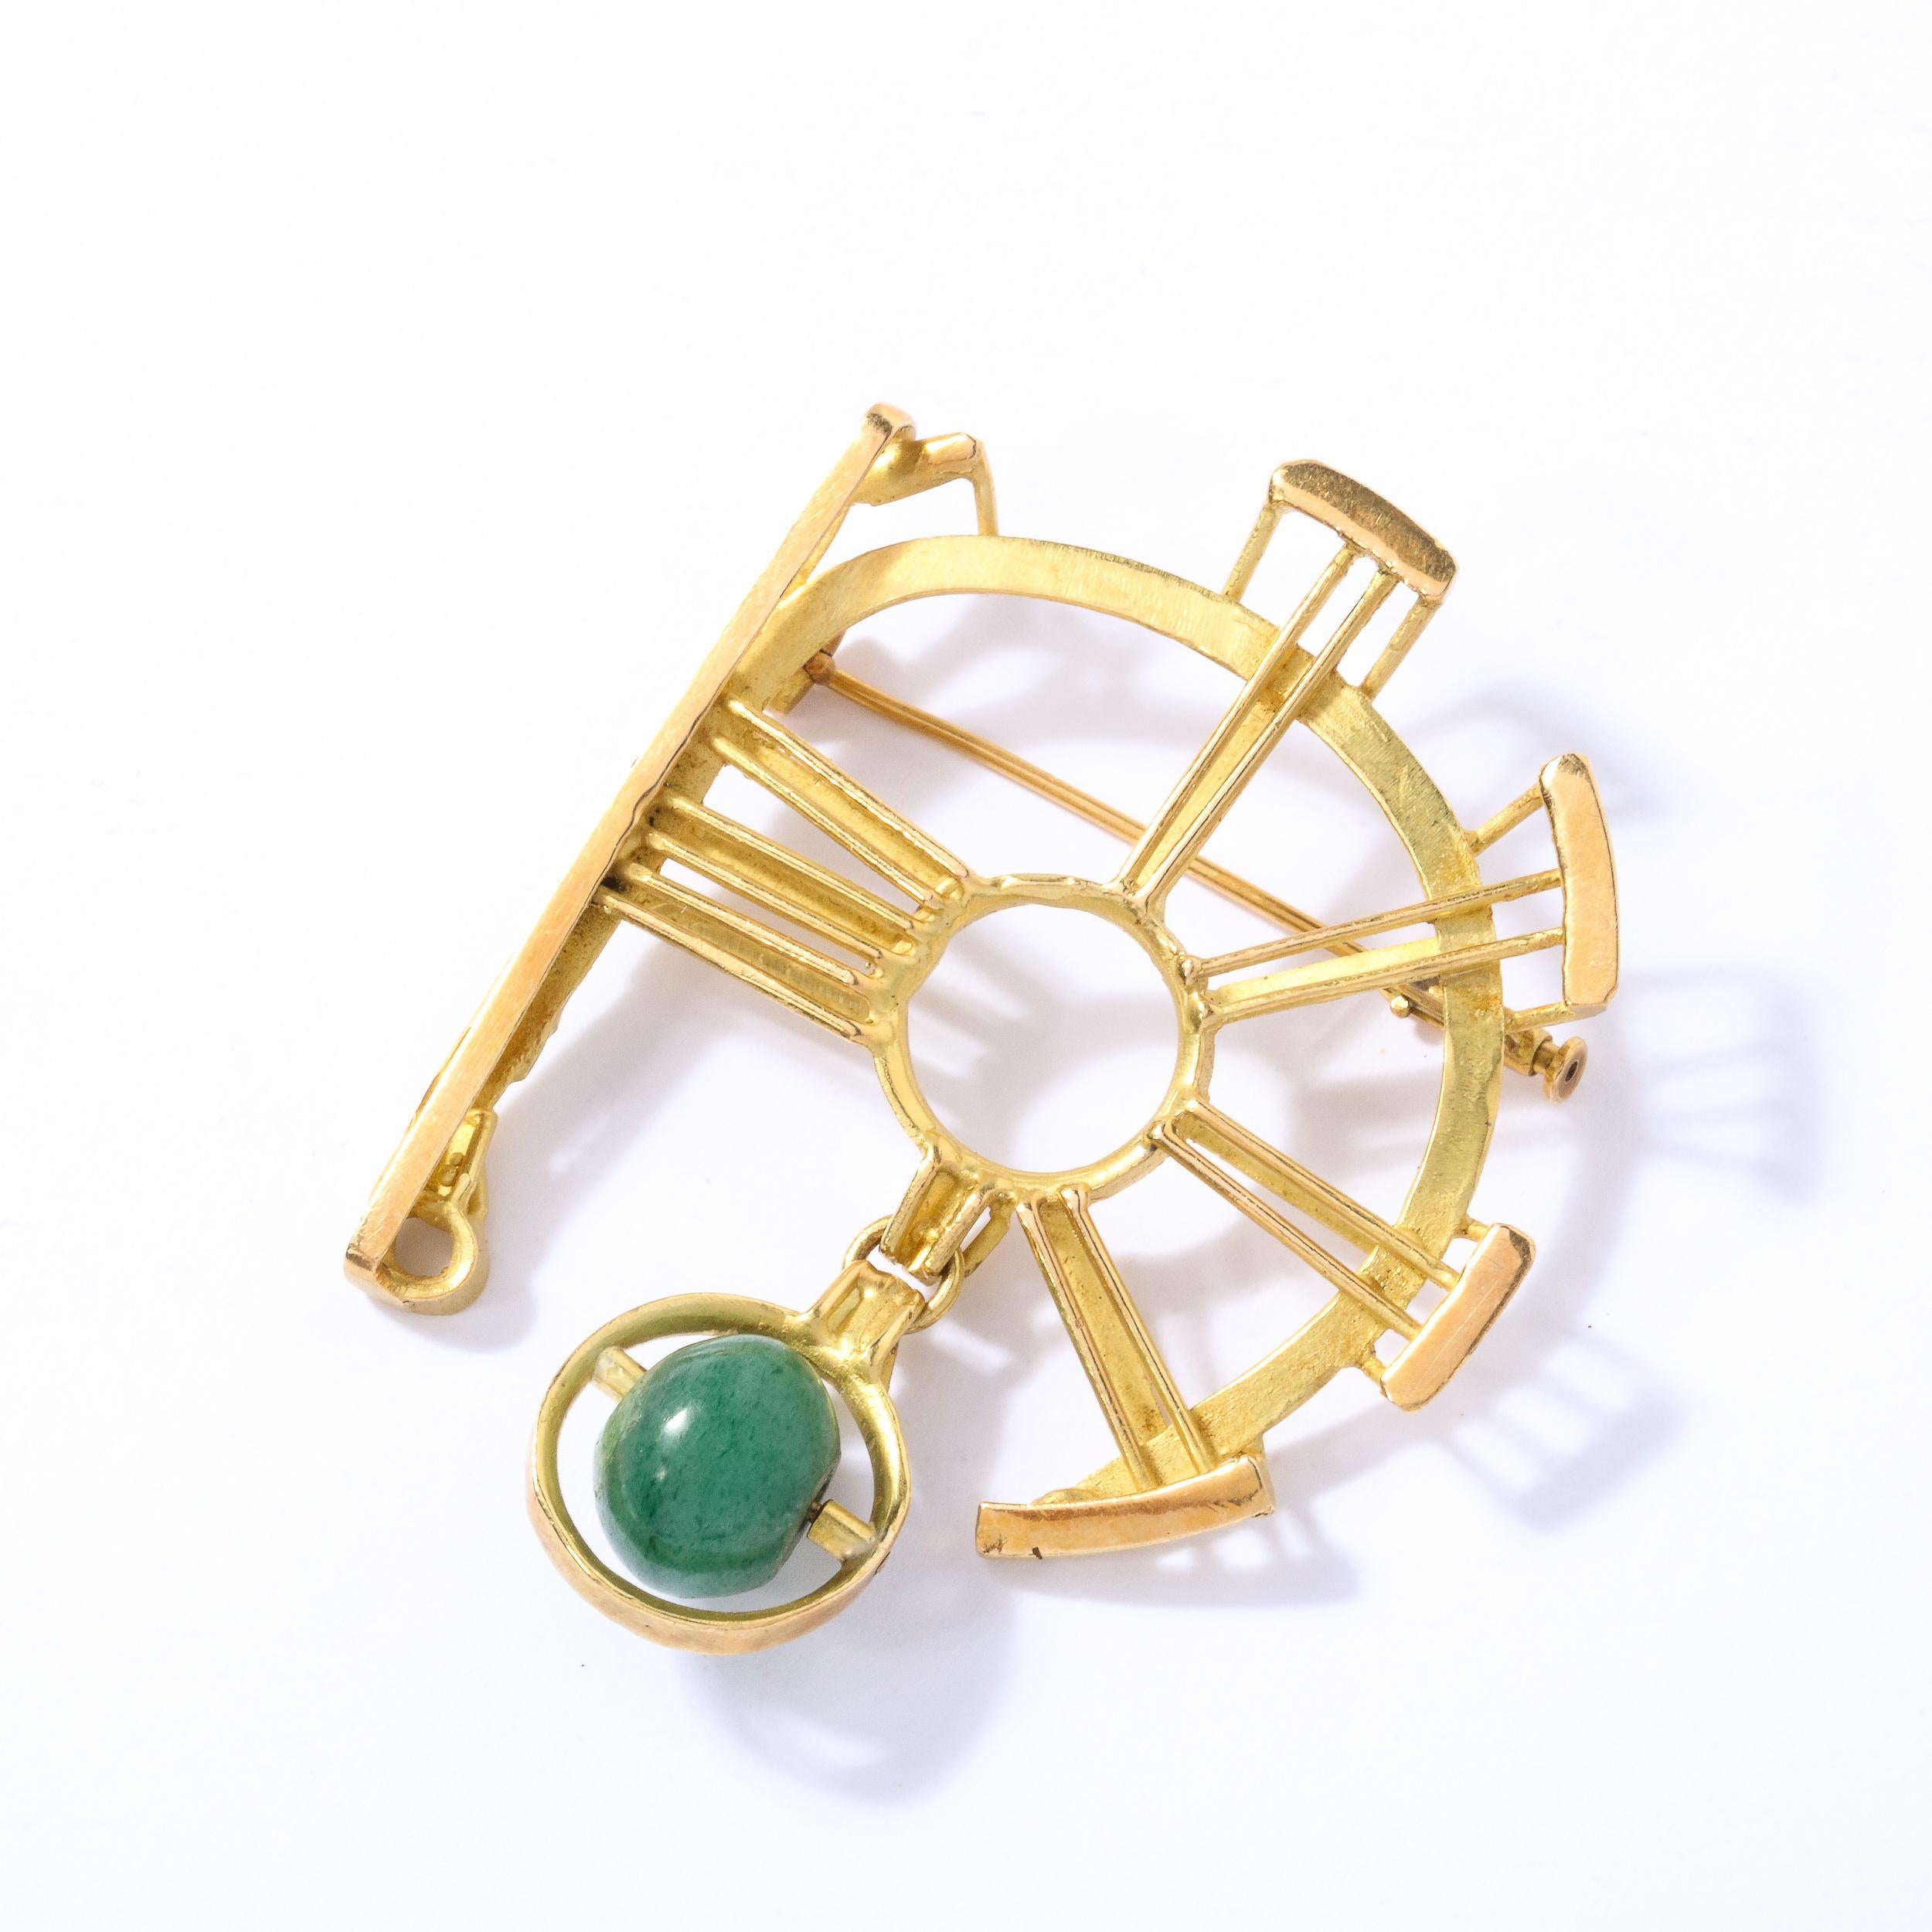 Sophisticated Mid-Century Modernist Serpentine Jade Gold Brooch In Excellent Condition For Sale In New York, NY